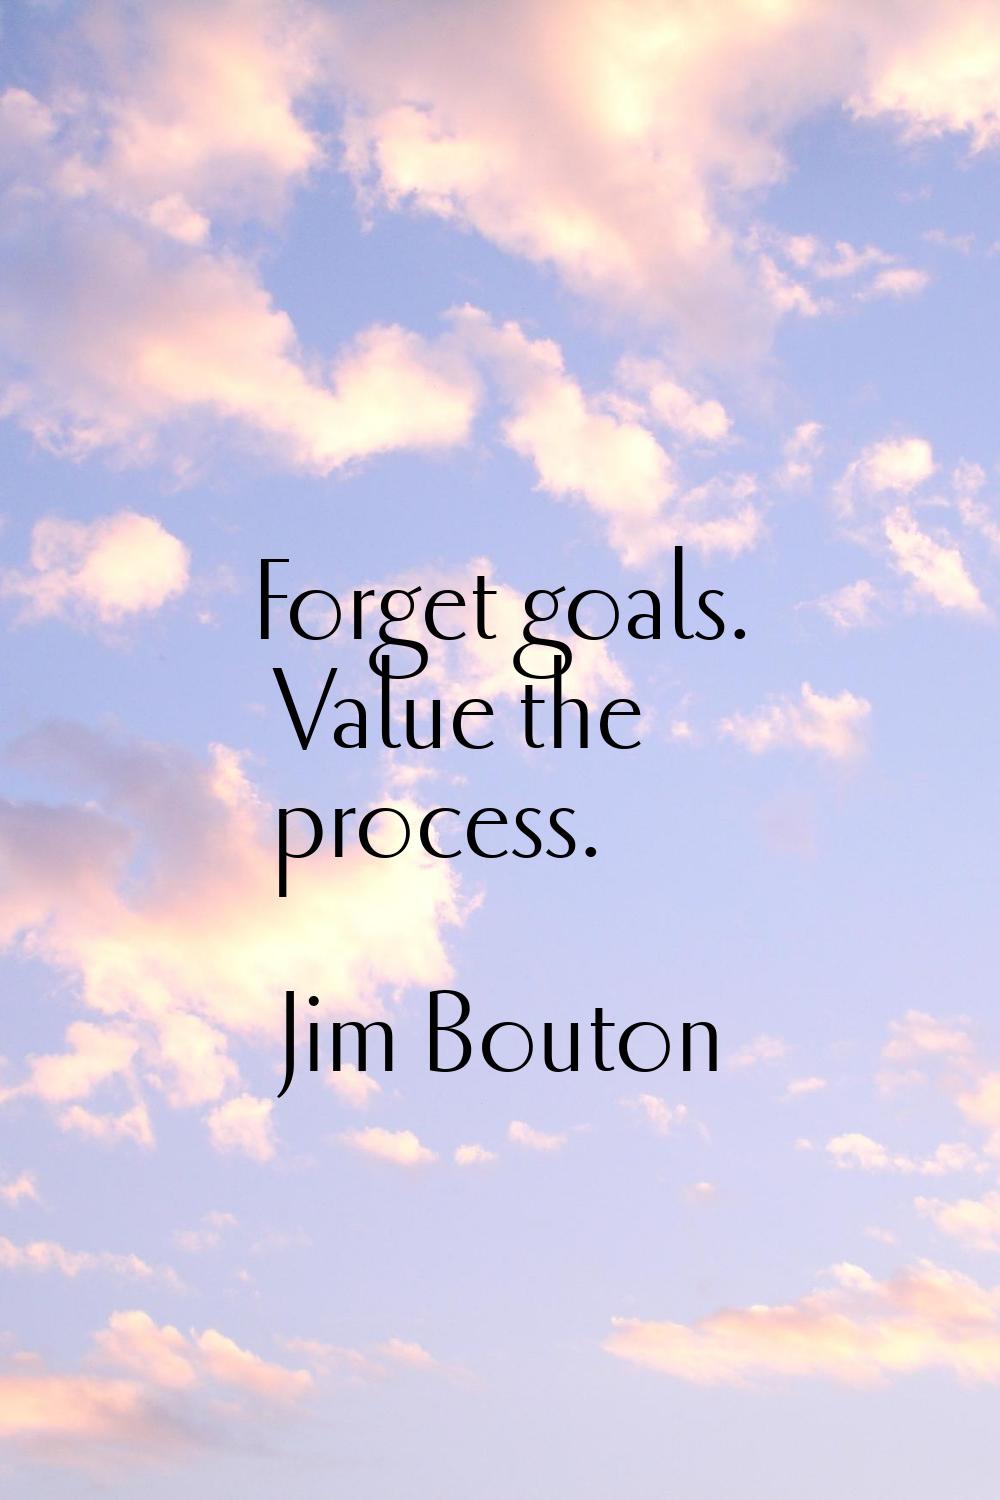 Forget goals. Value the process.